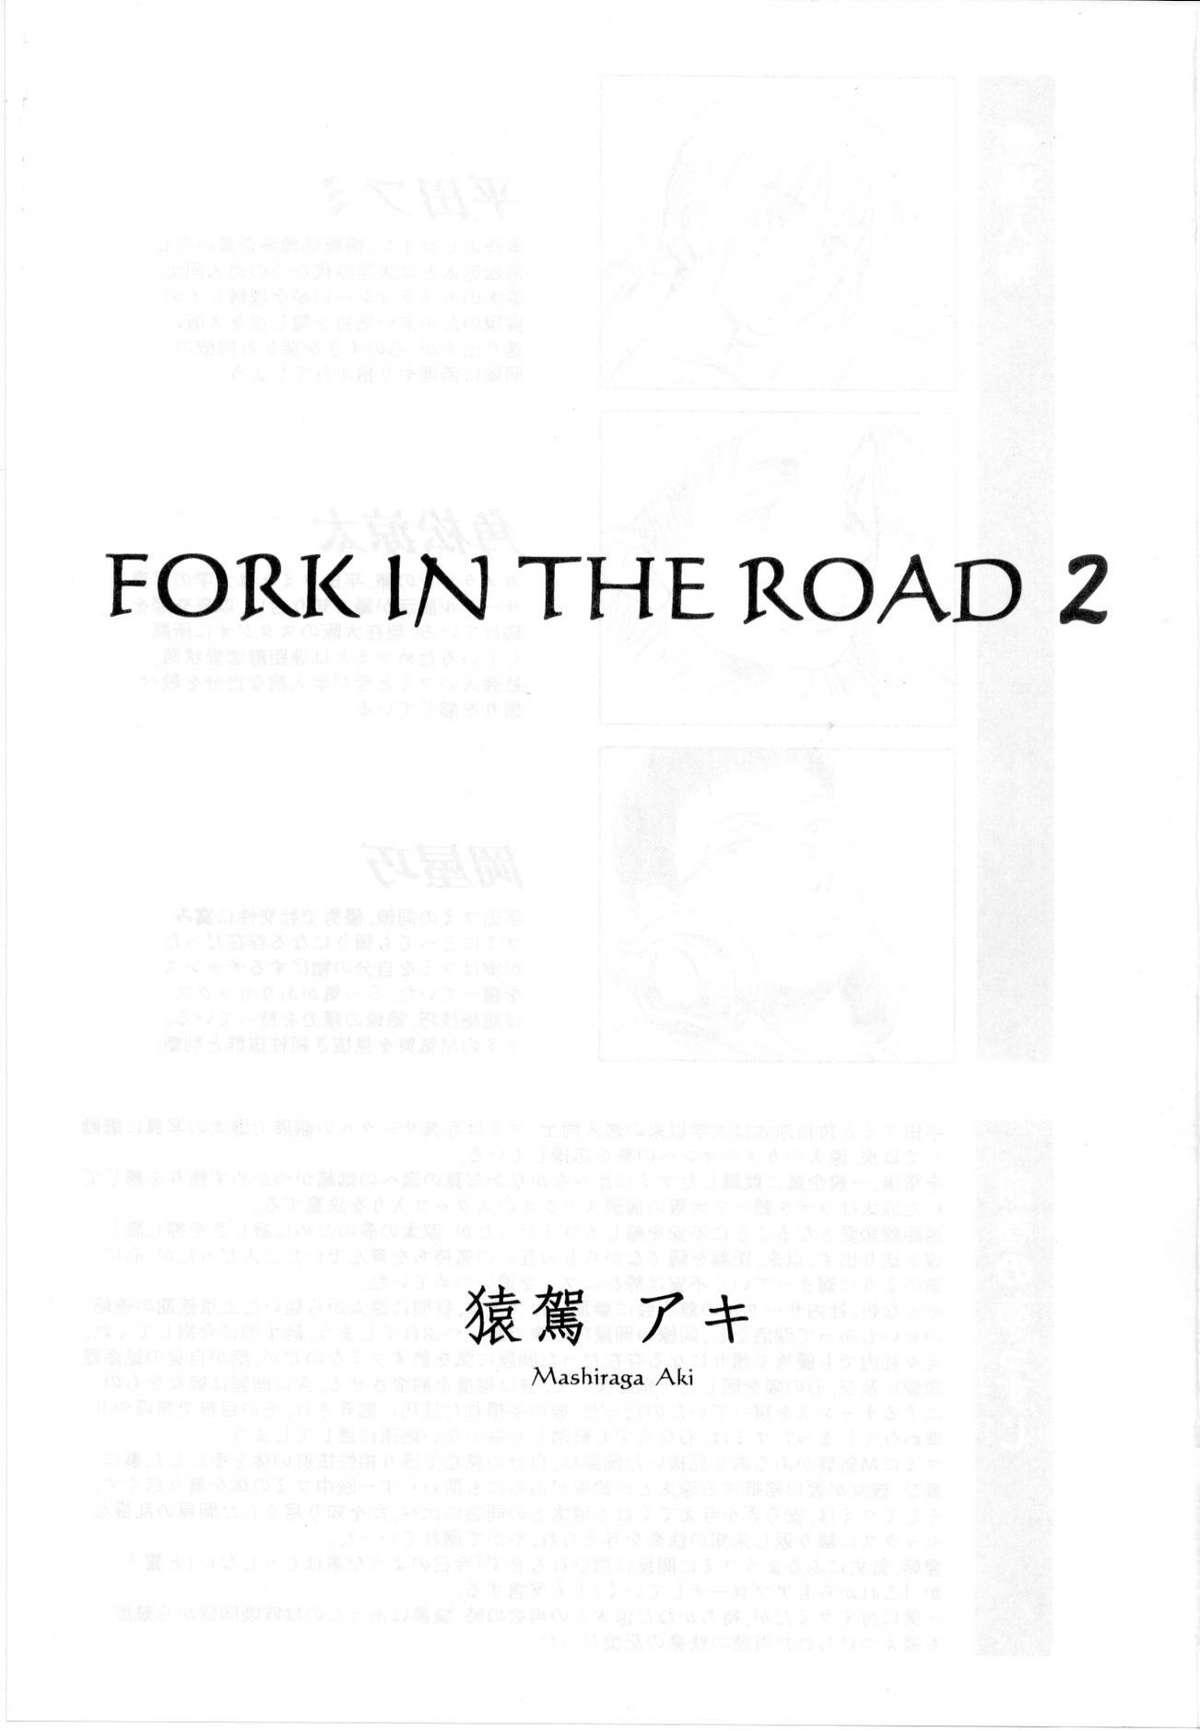 FORK IN THE ROAD 2 1